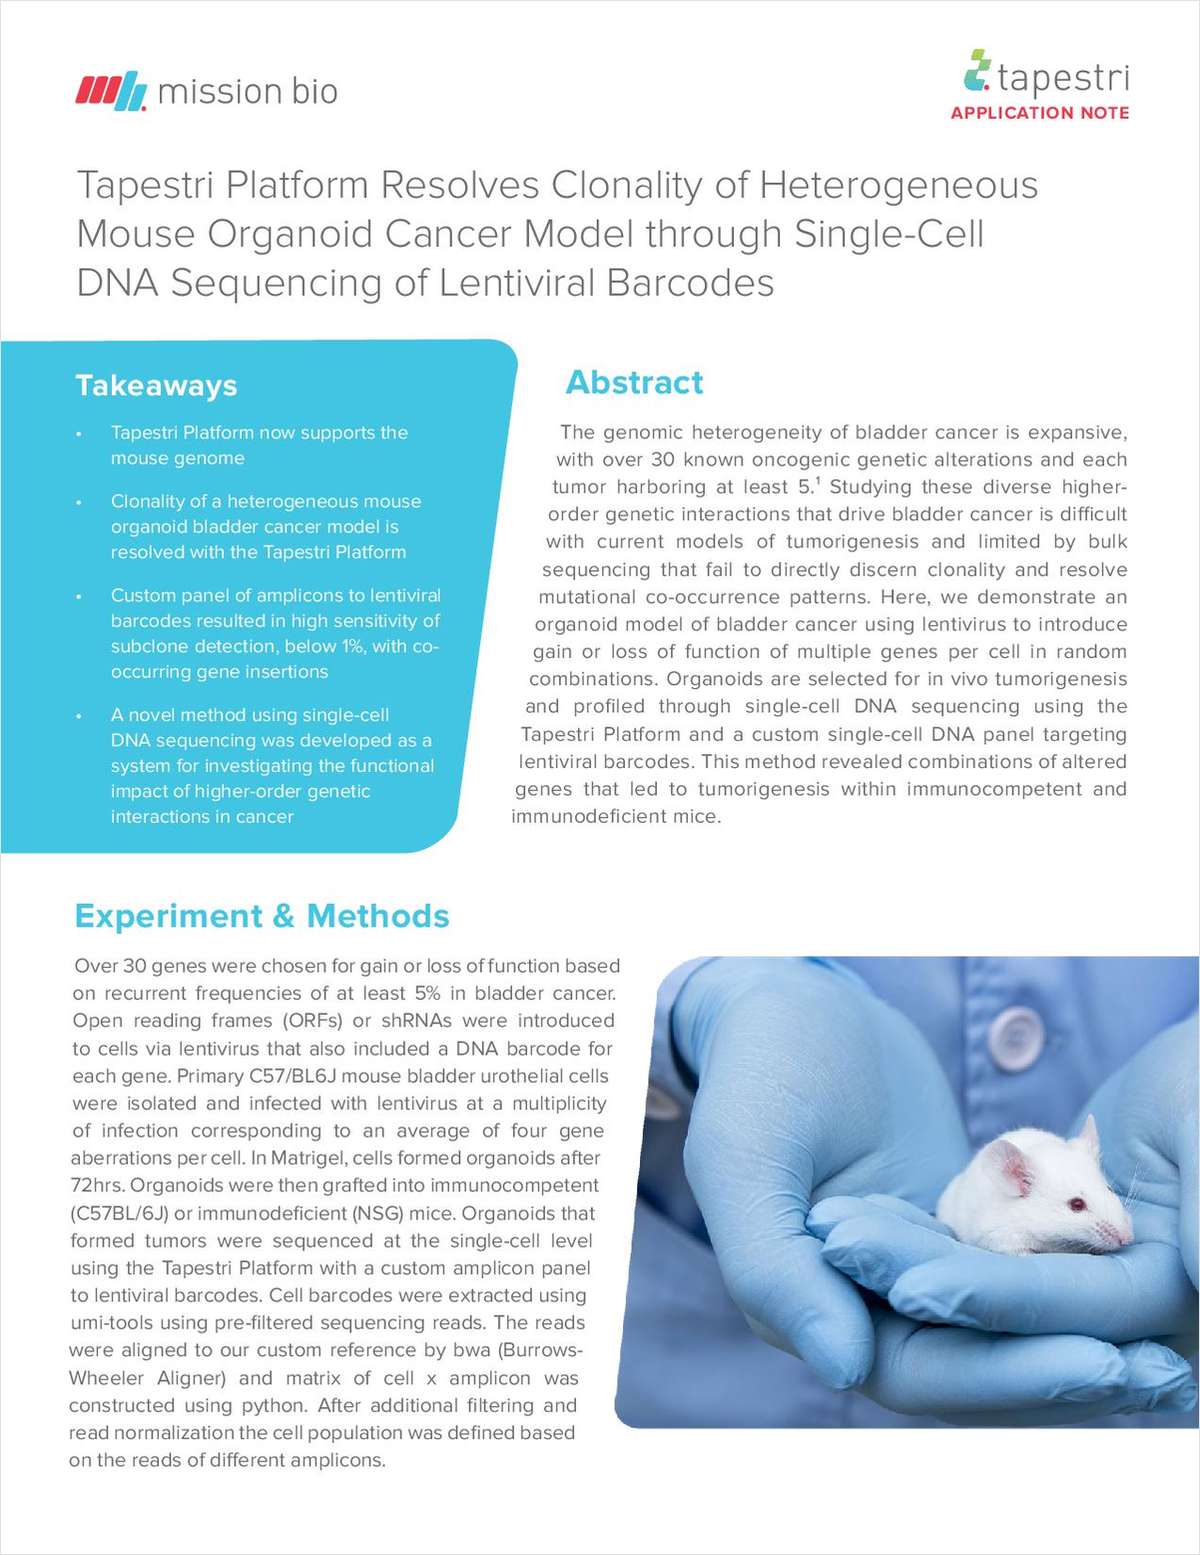 Tapestri Platform Resolves Clonality of Heterogeneous Mouse Organoid Cancer Model Through Single-Cell DNA Sequencing of Lentiviral Barcodes